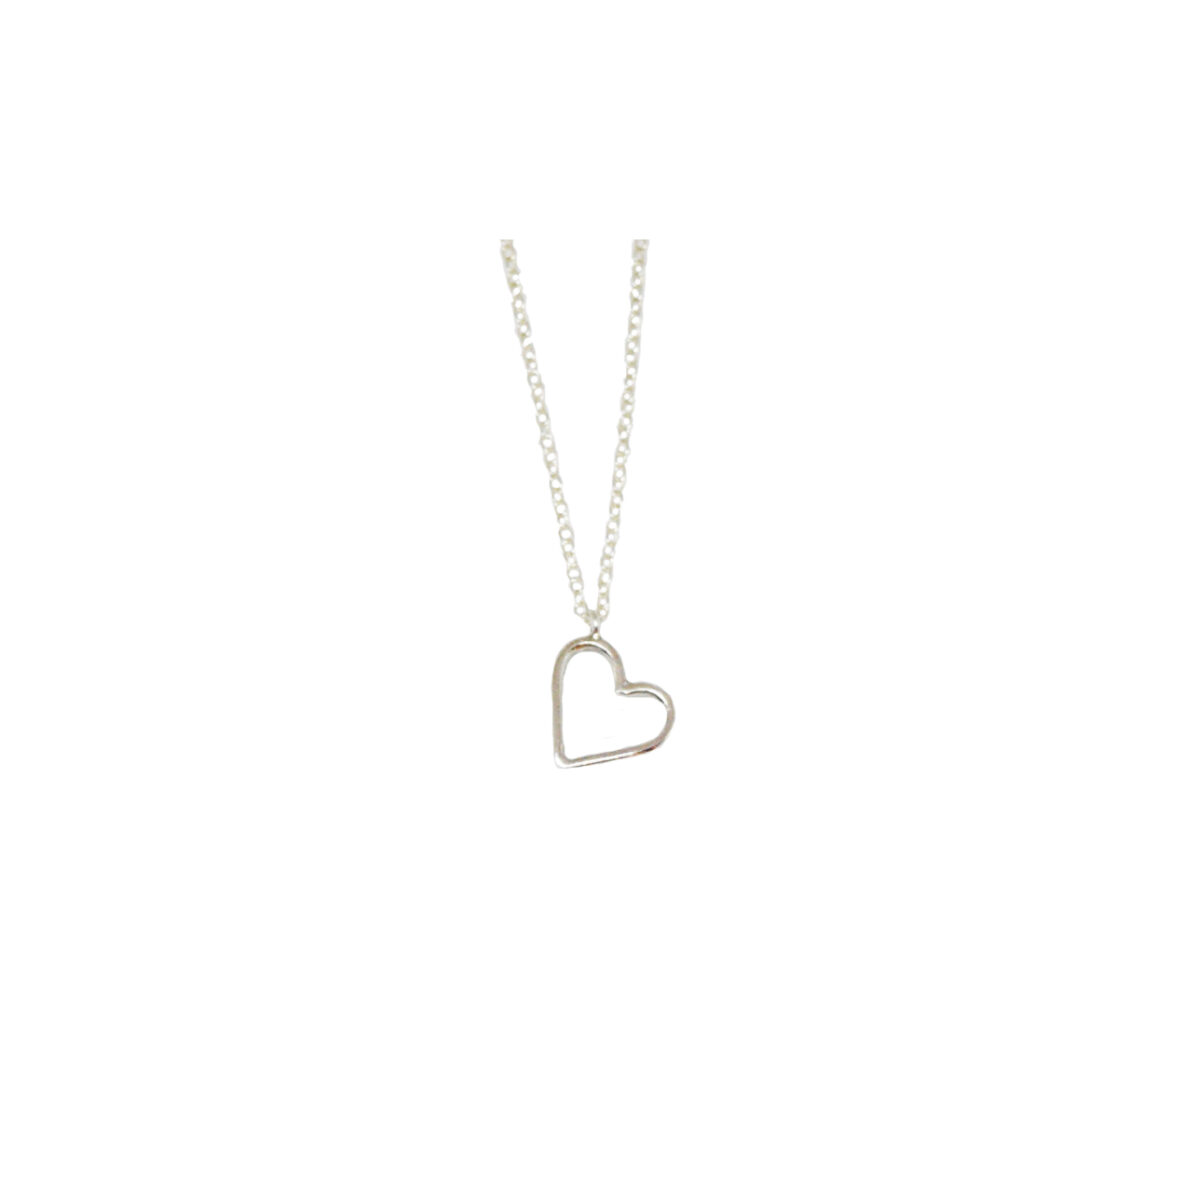 Amore necklace II silver